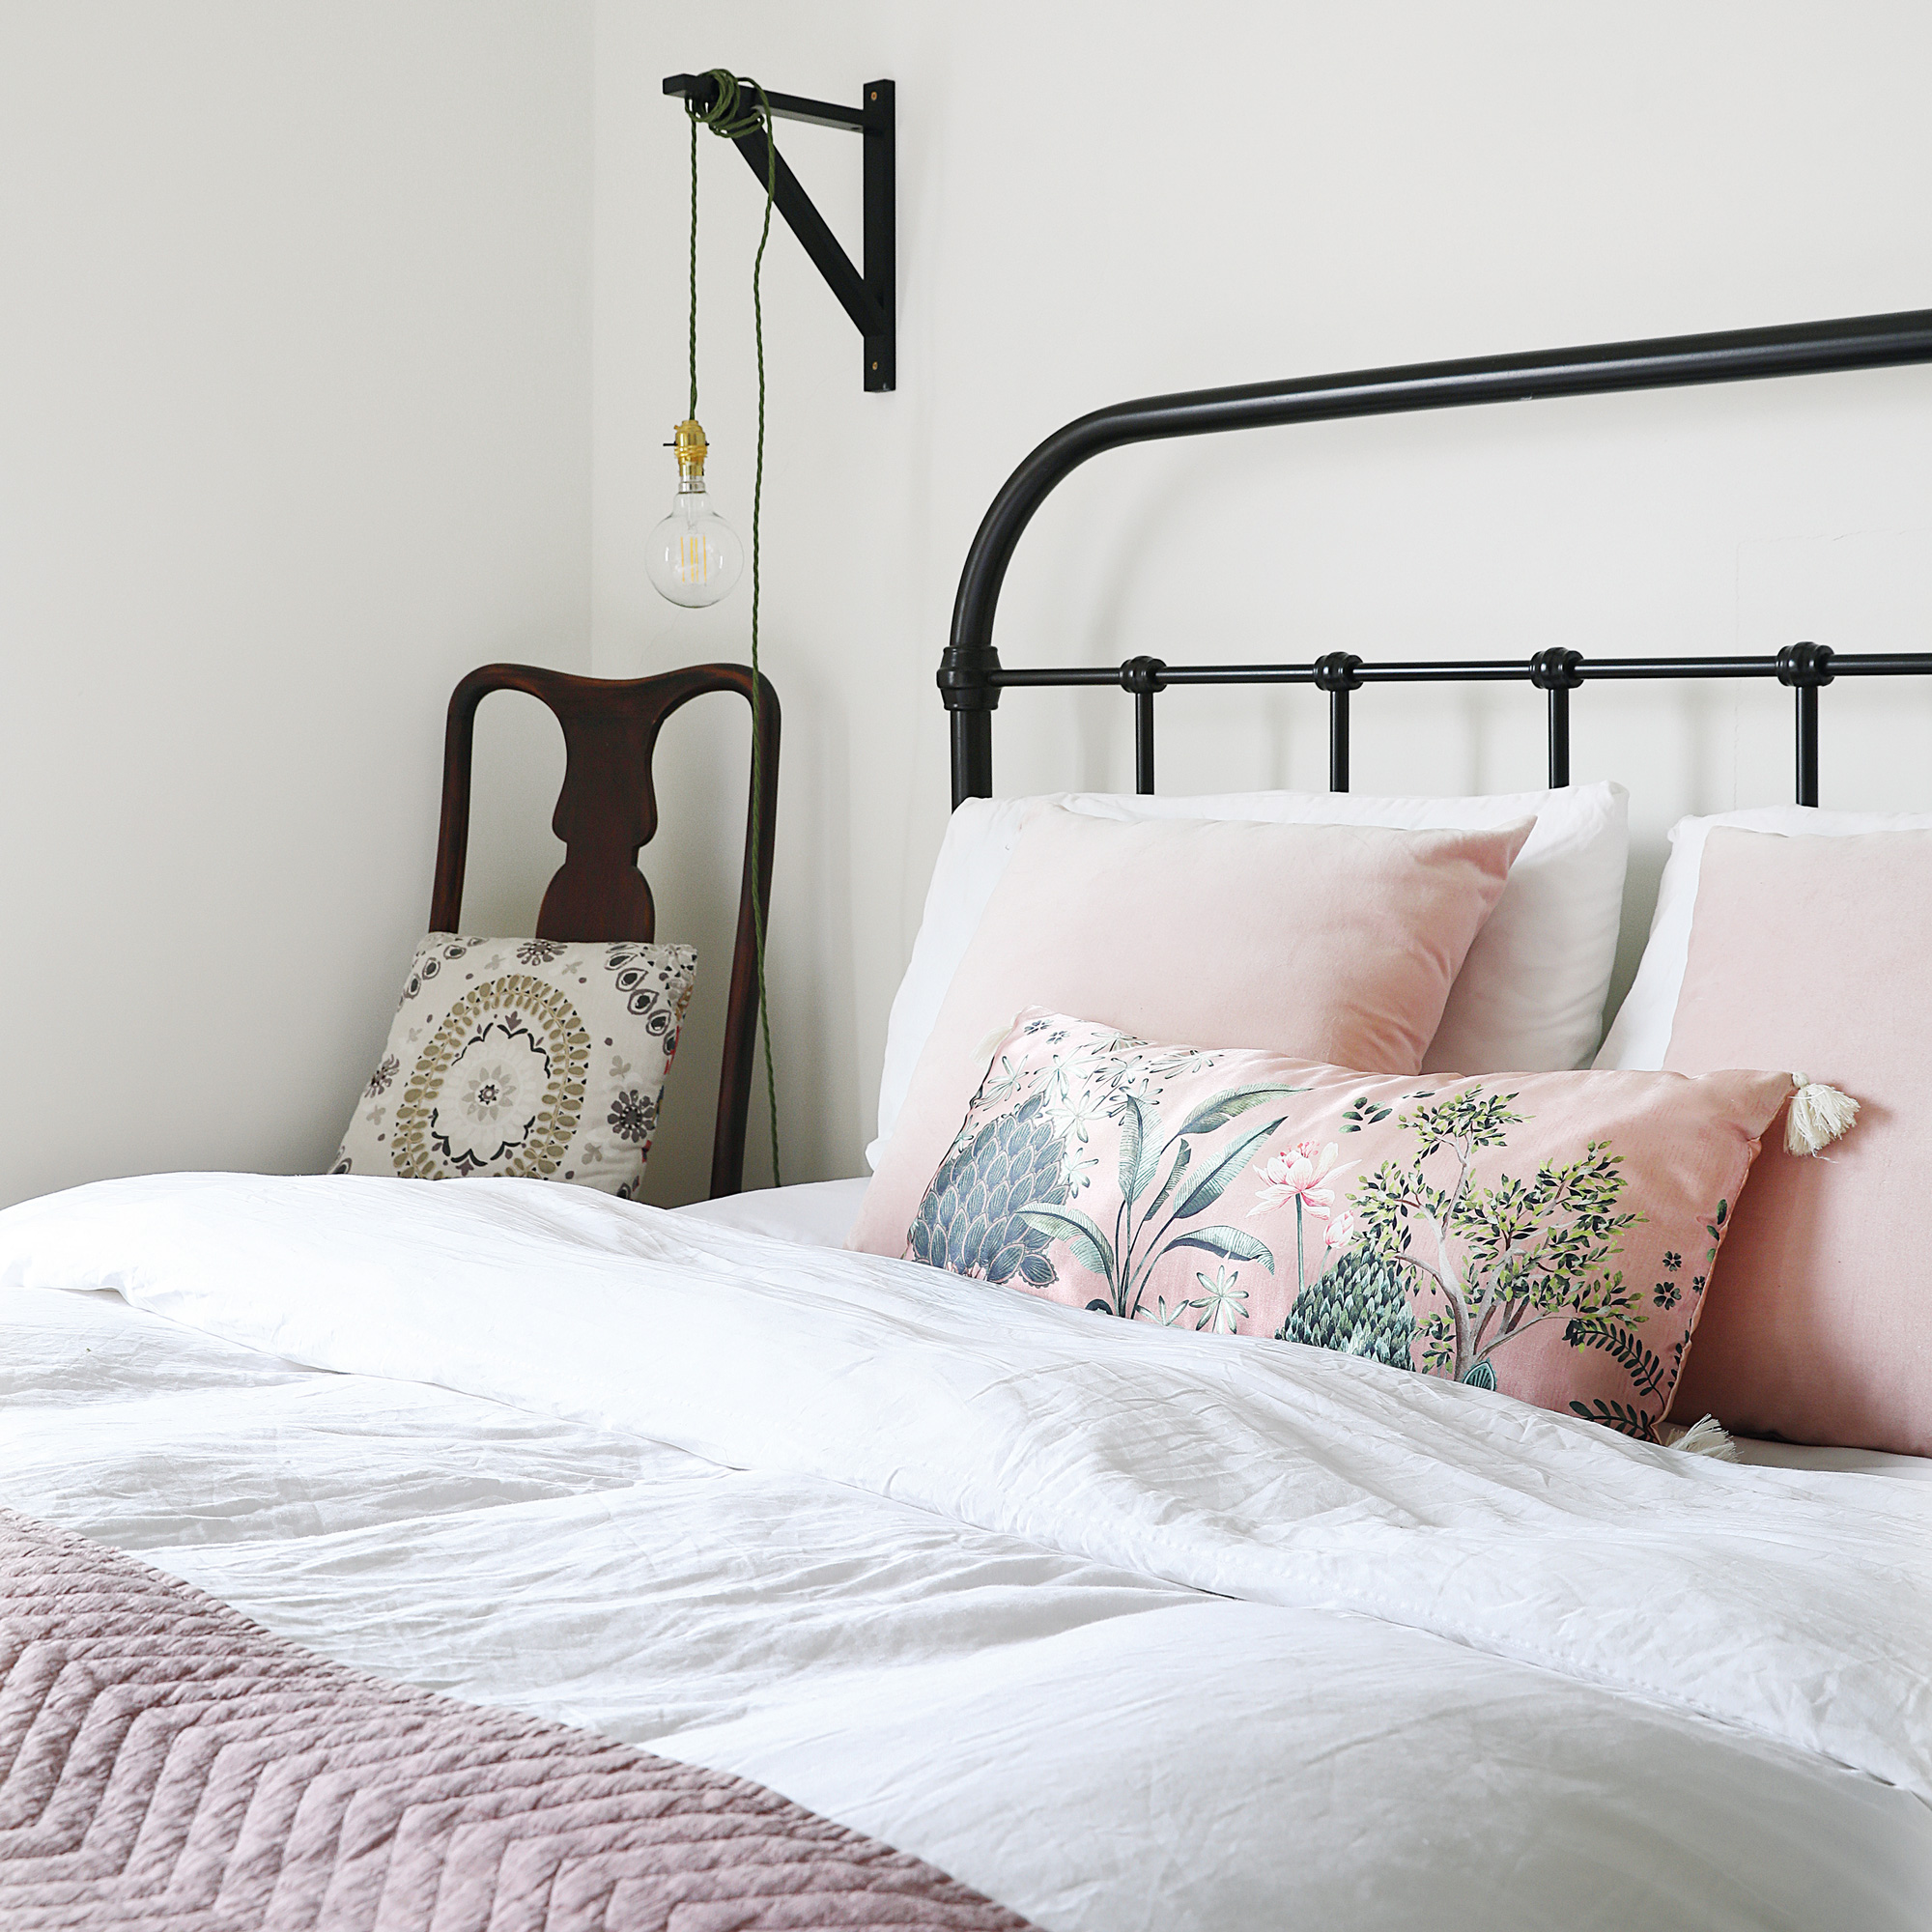 Victorian property revamp bedroom with black metal bed and pink and white bedlinen